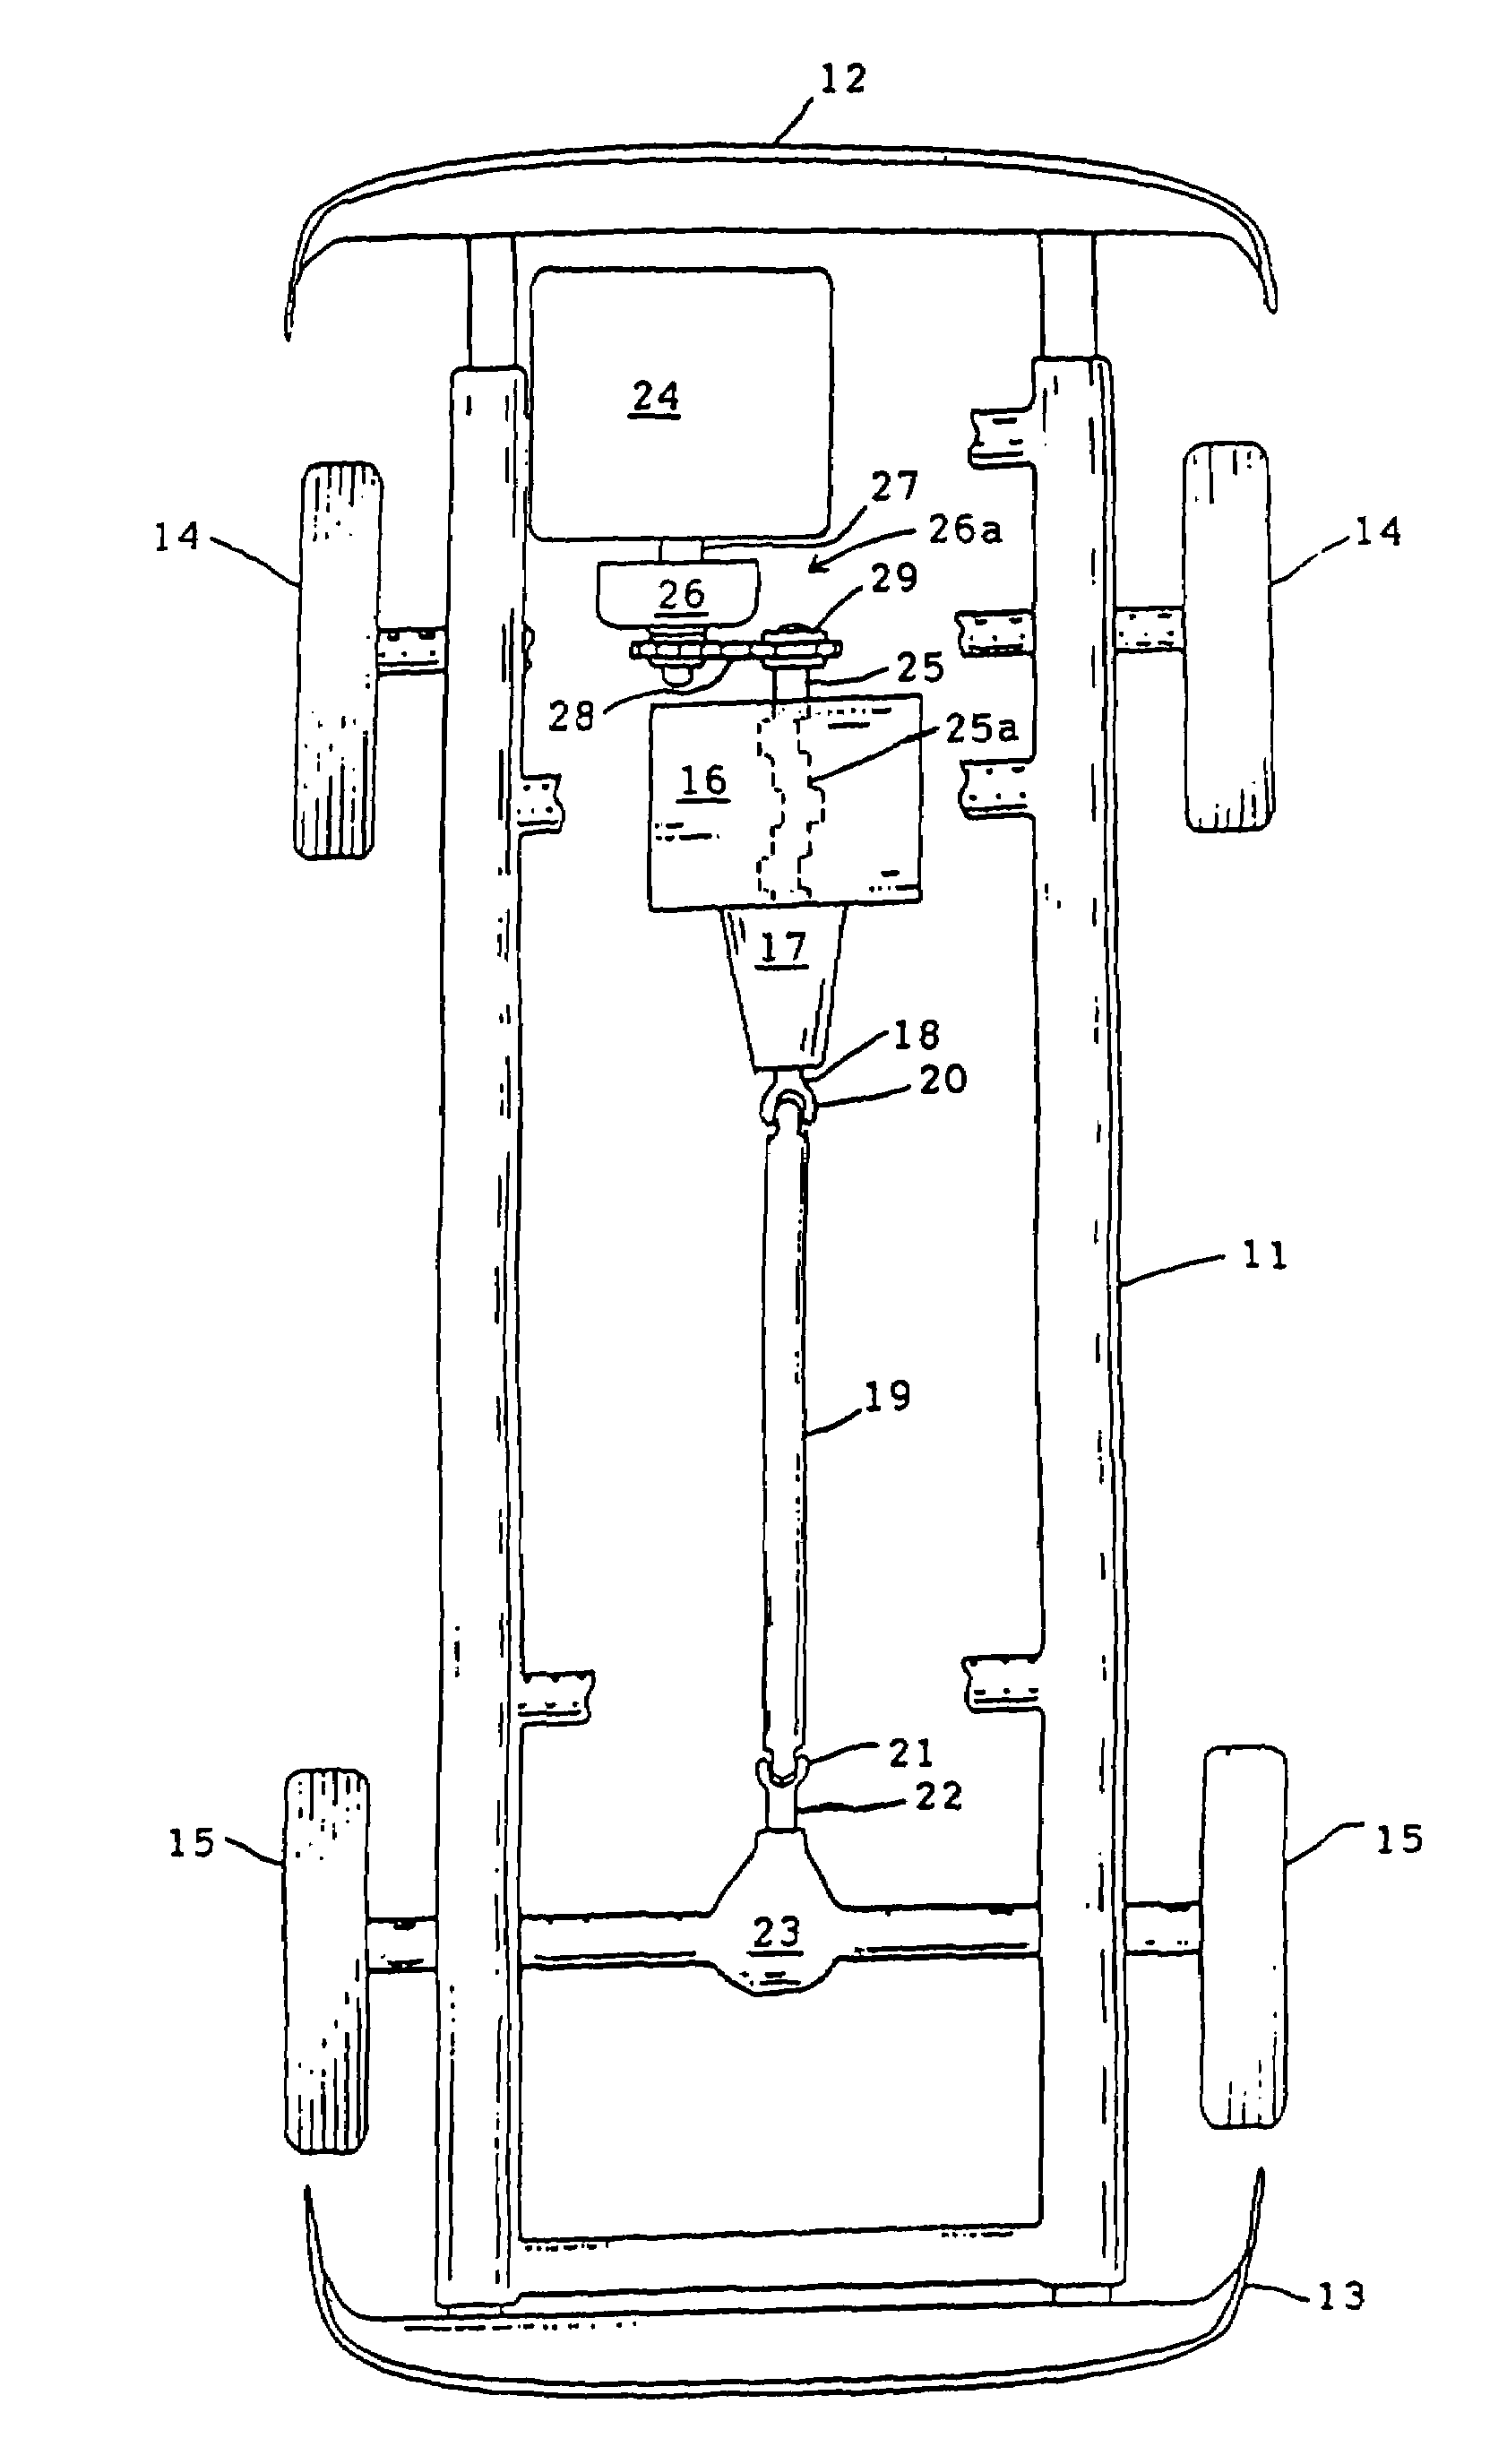 Vehicle with primary cruiser engine and auxiliary accelerator engine